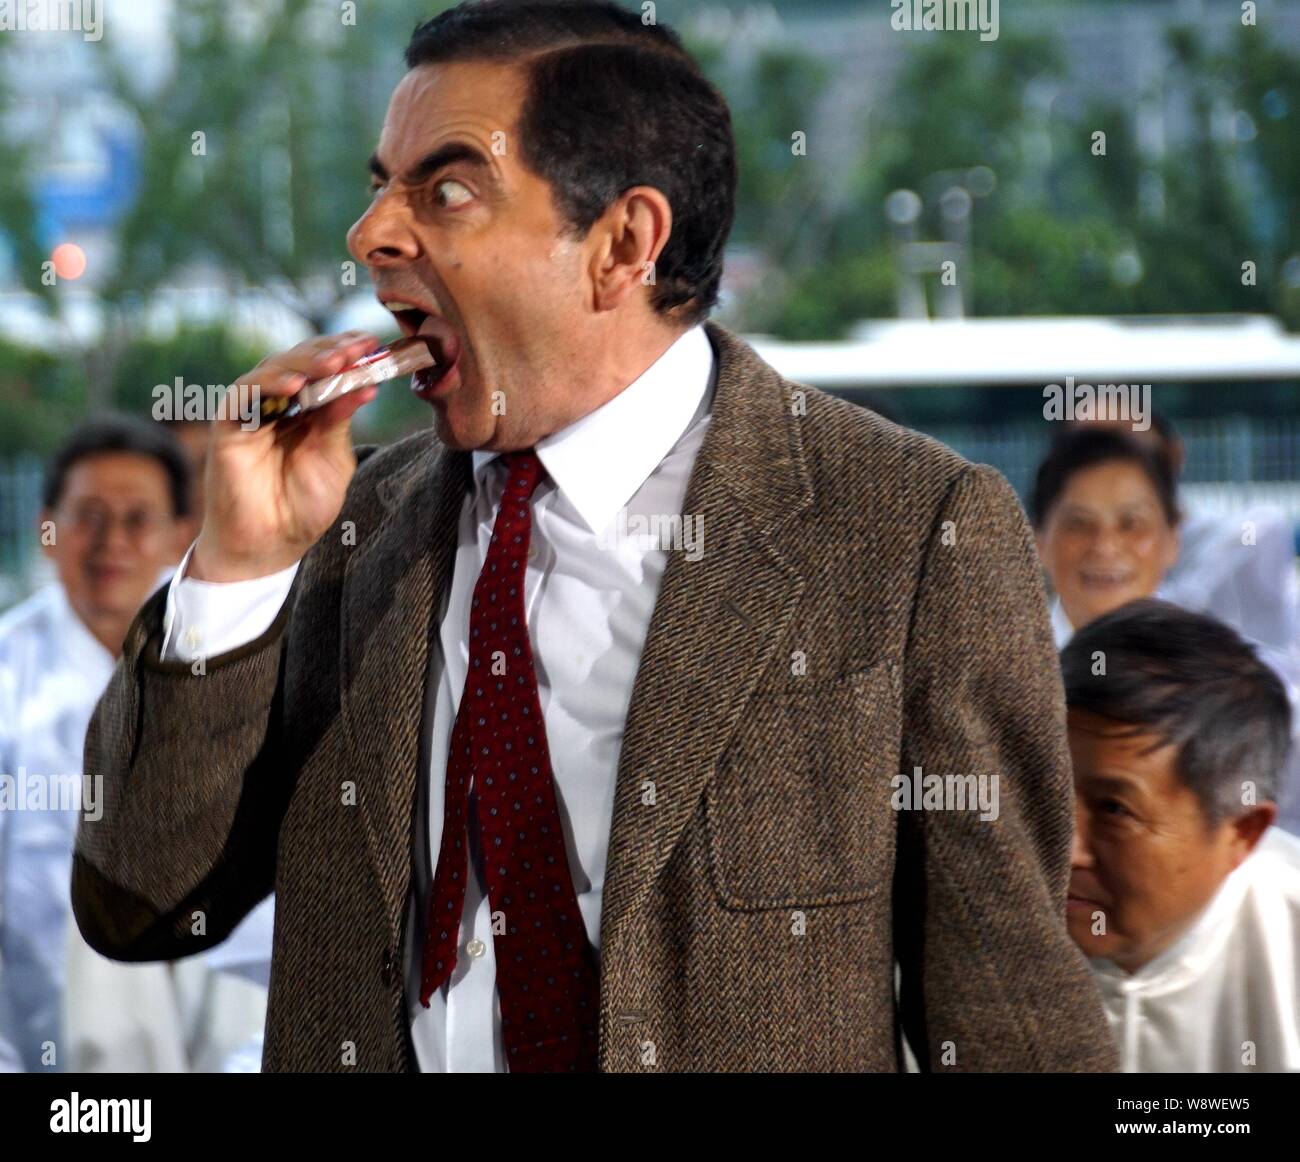 English actor Rowan Atkinson eats a bar of chocolate as he plays Mr. Bean during a filming session for a TV commercial at the Mercedes-Benz Arena in S Stock Photo